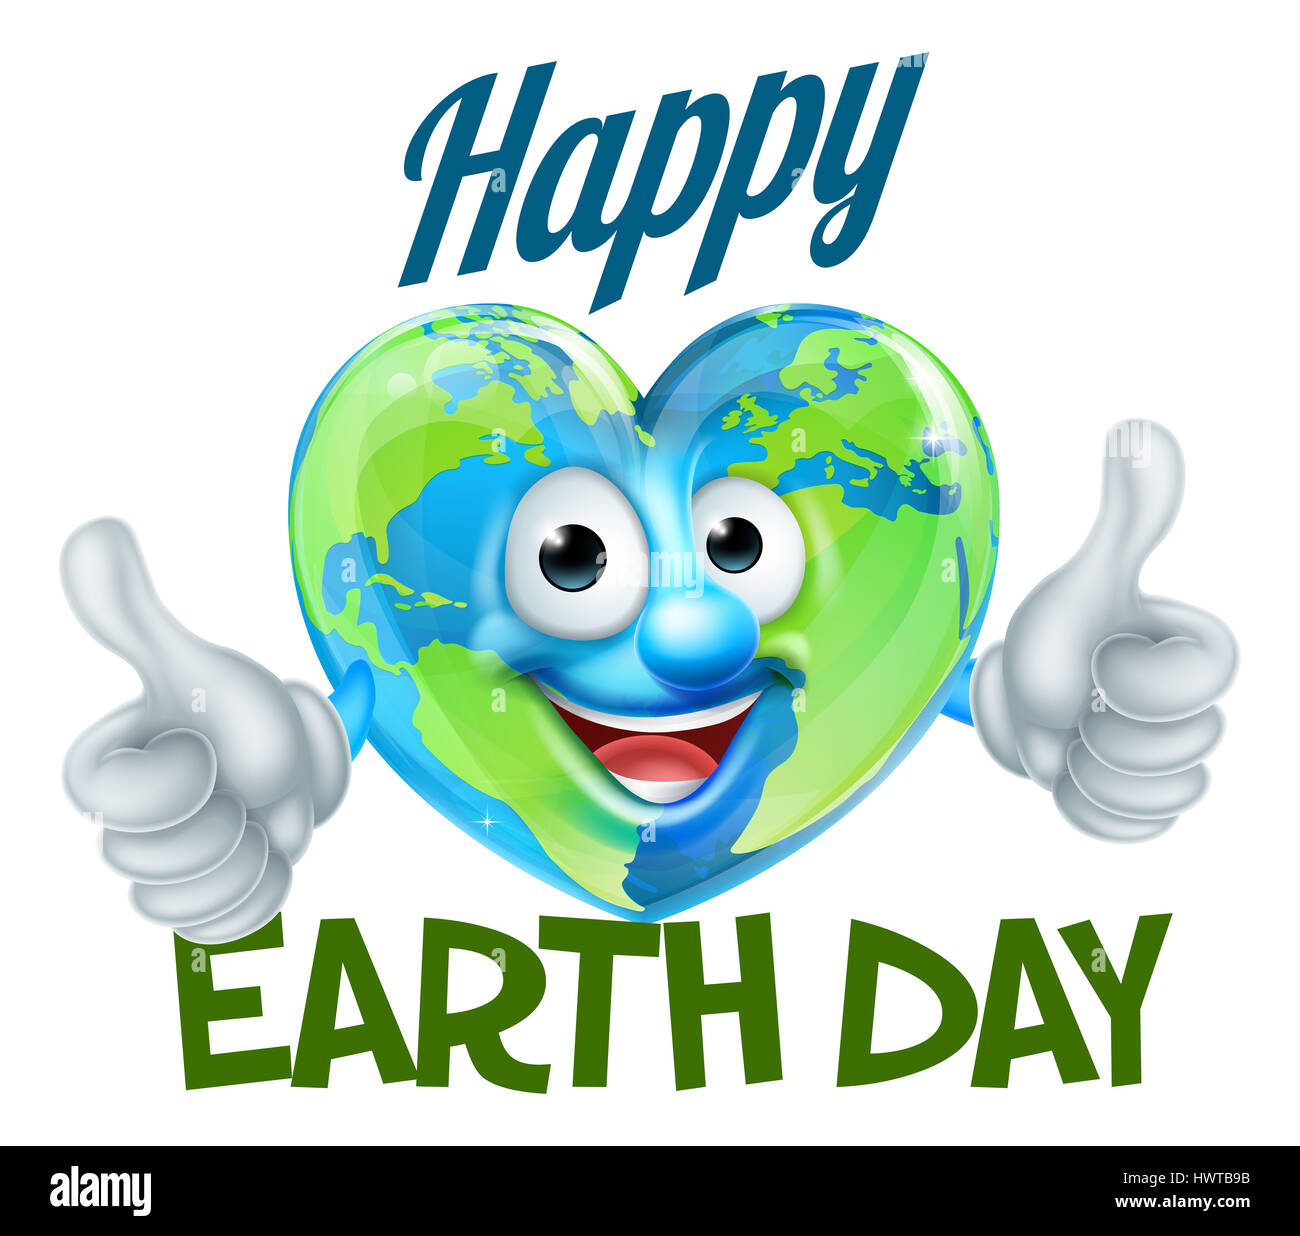 A Happy Earth Day design with a heart shaped world globe cartoon character Stock Photo